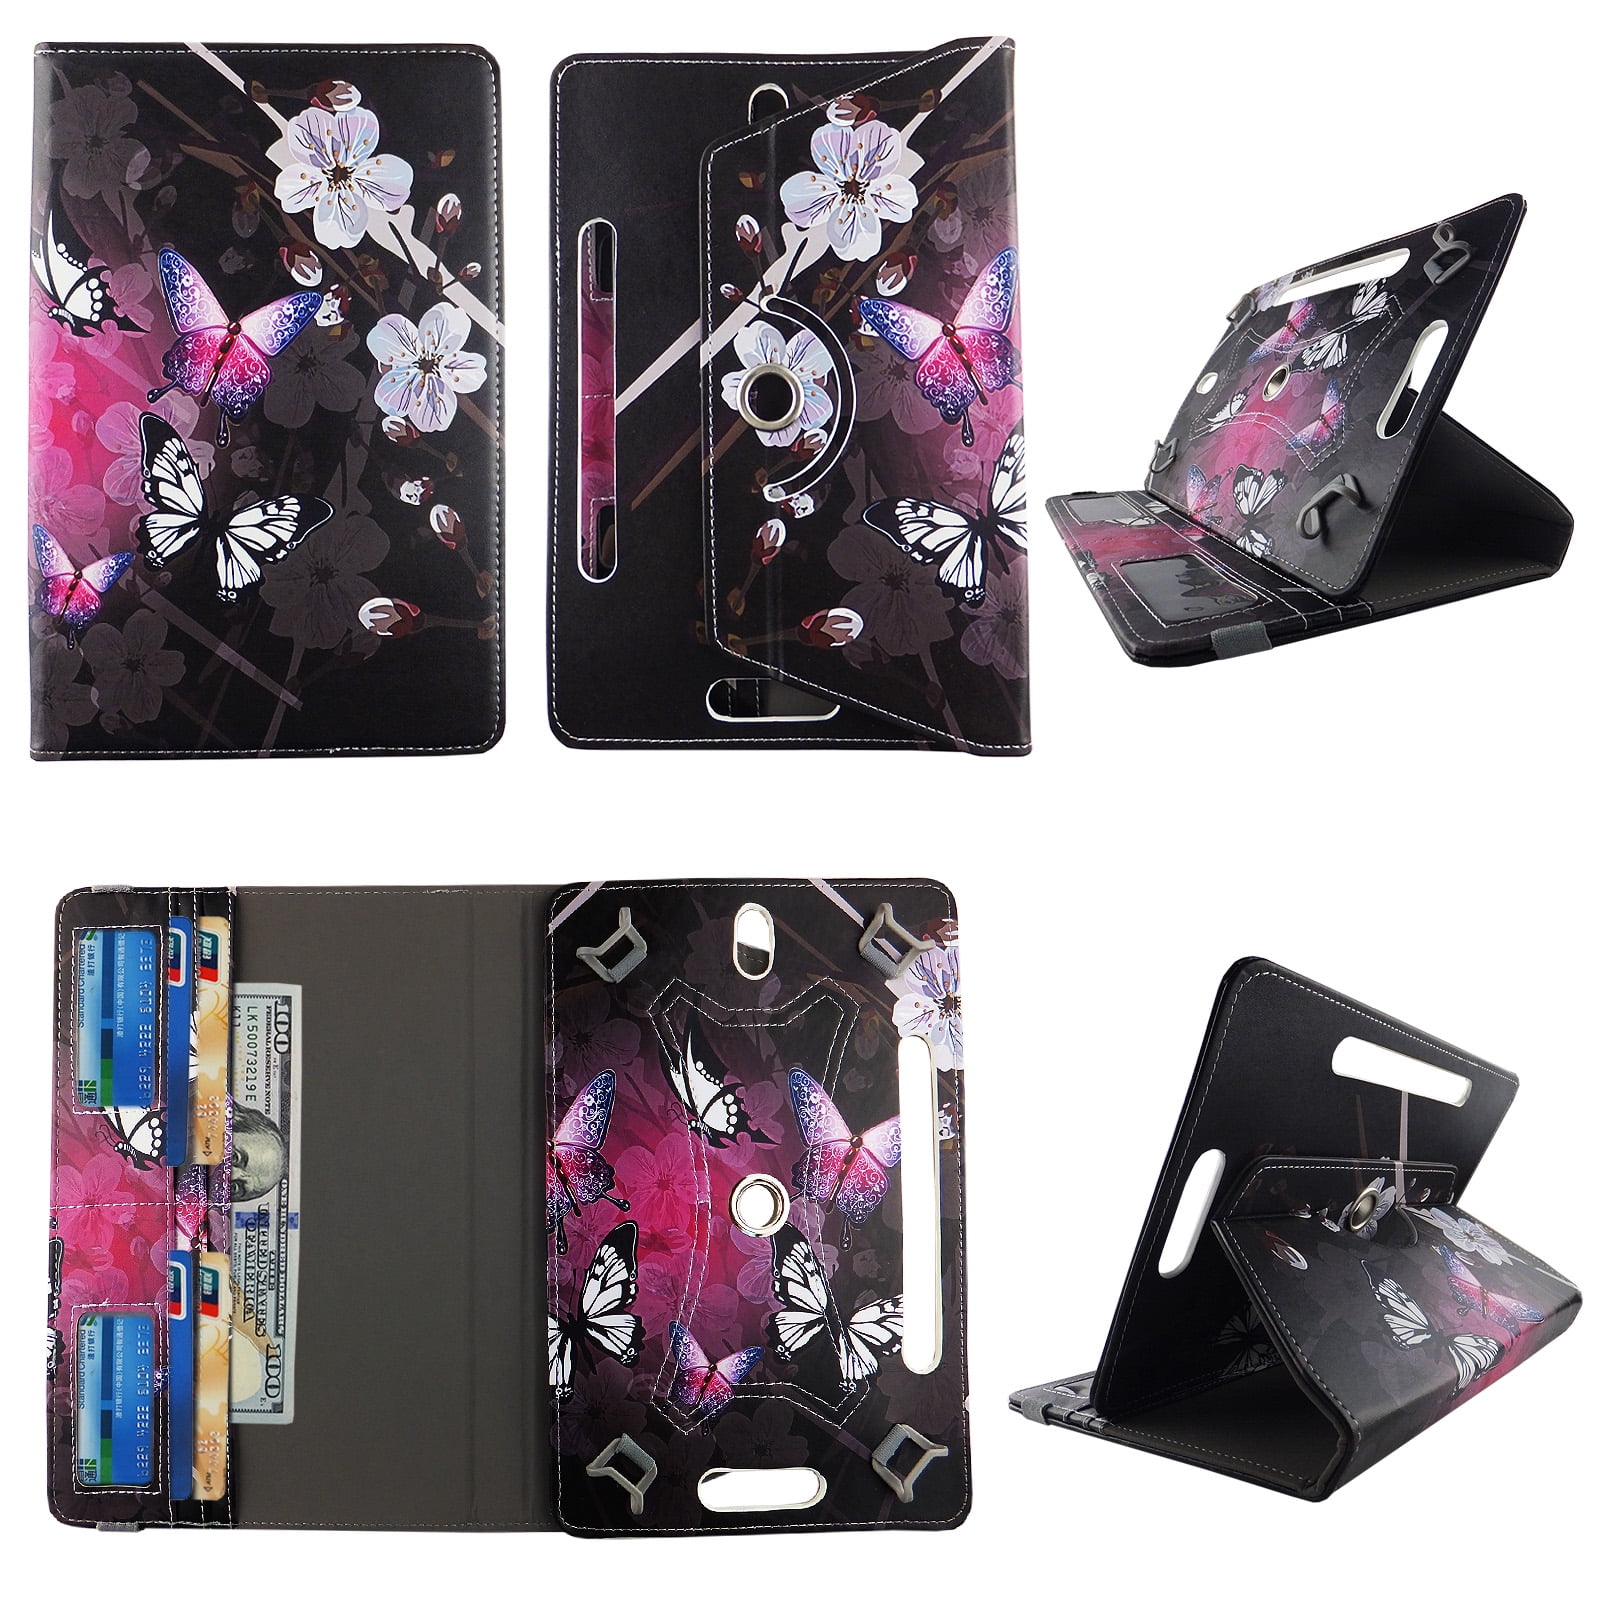 White Flower Butterfly tablet case 10 inch for LG G Pad 10.1 10